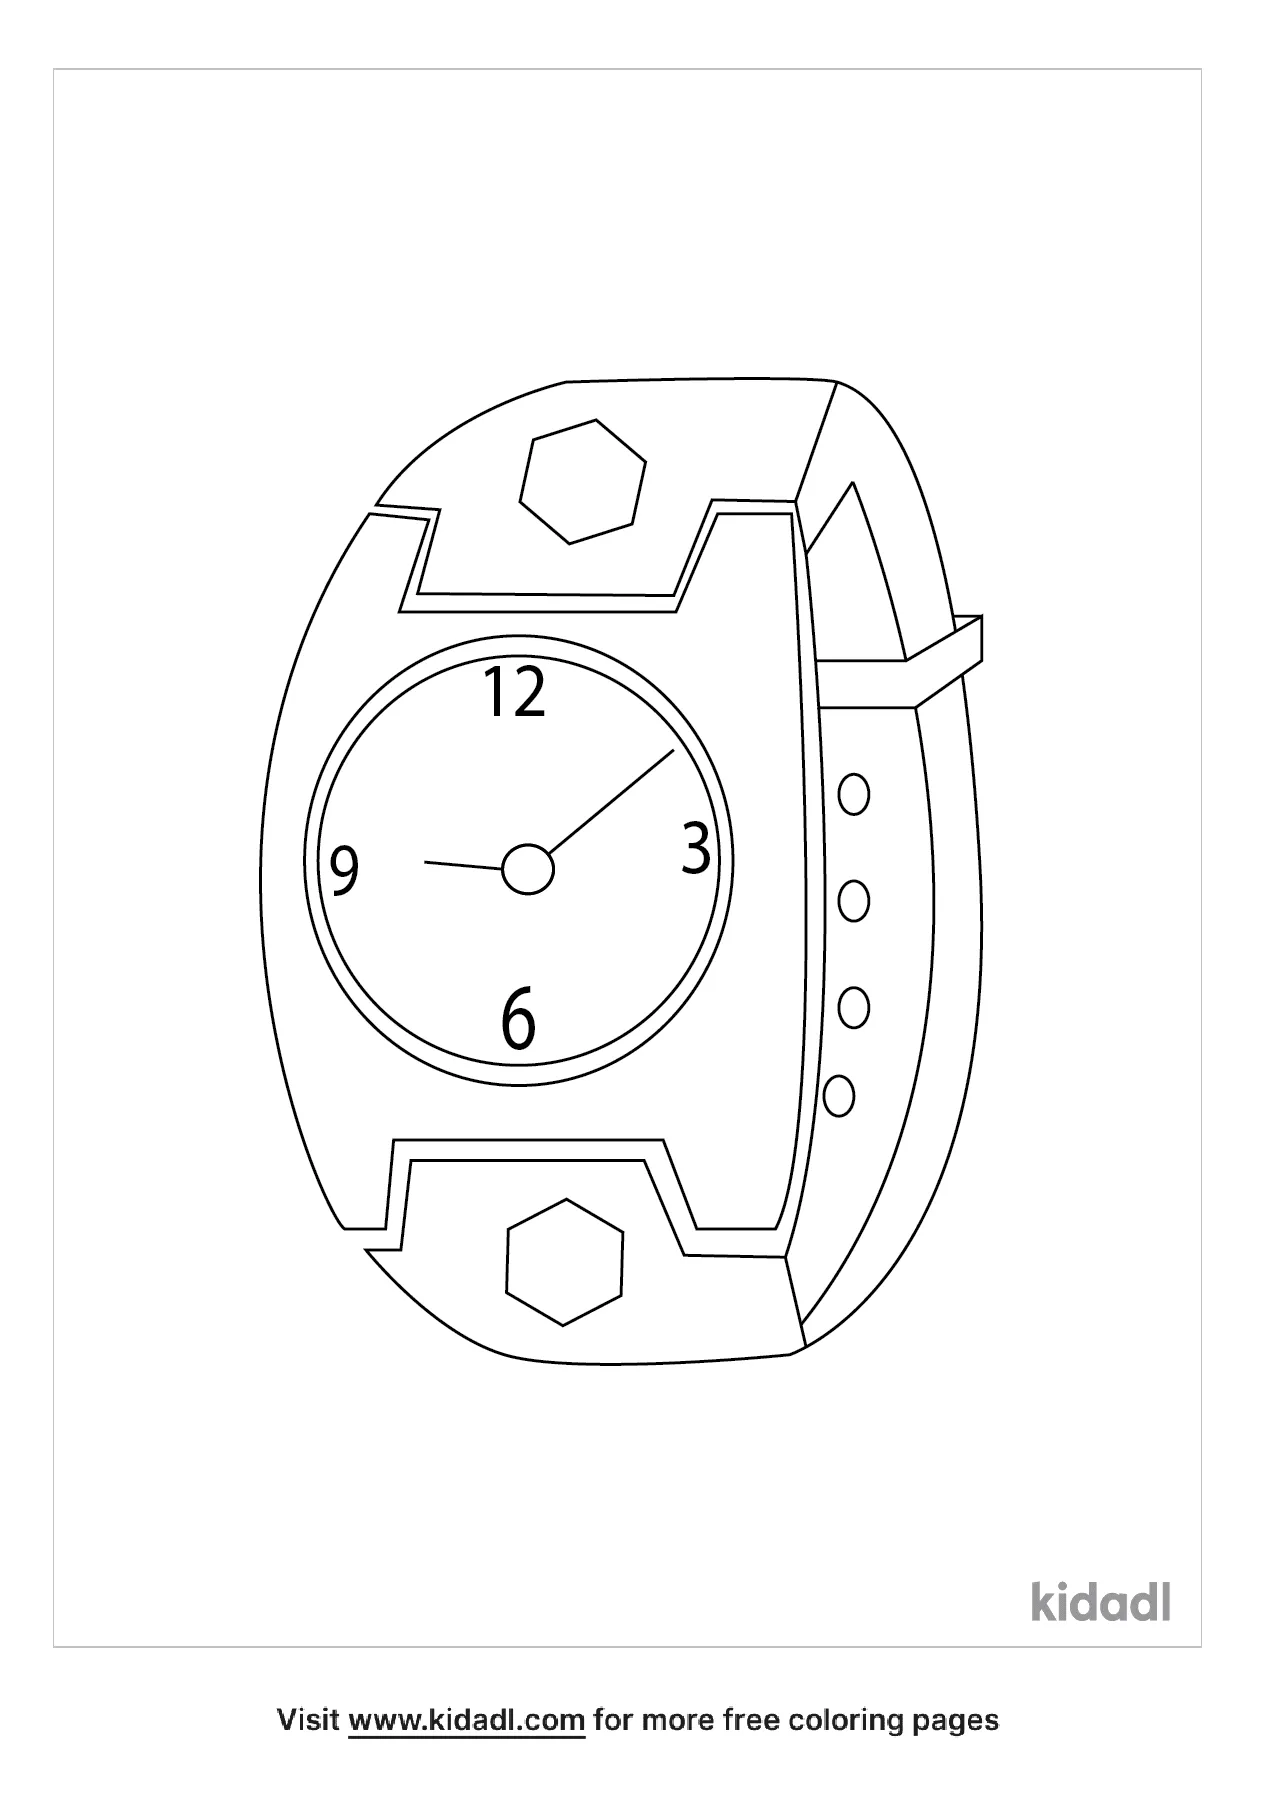 Free Watch Coloring Page | Coloring Page Printables | Kidadl